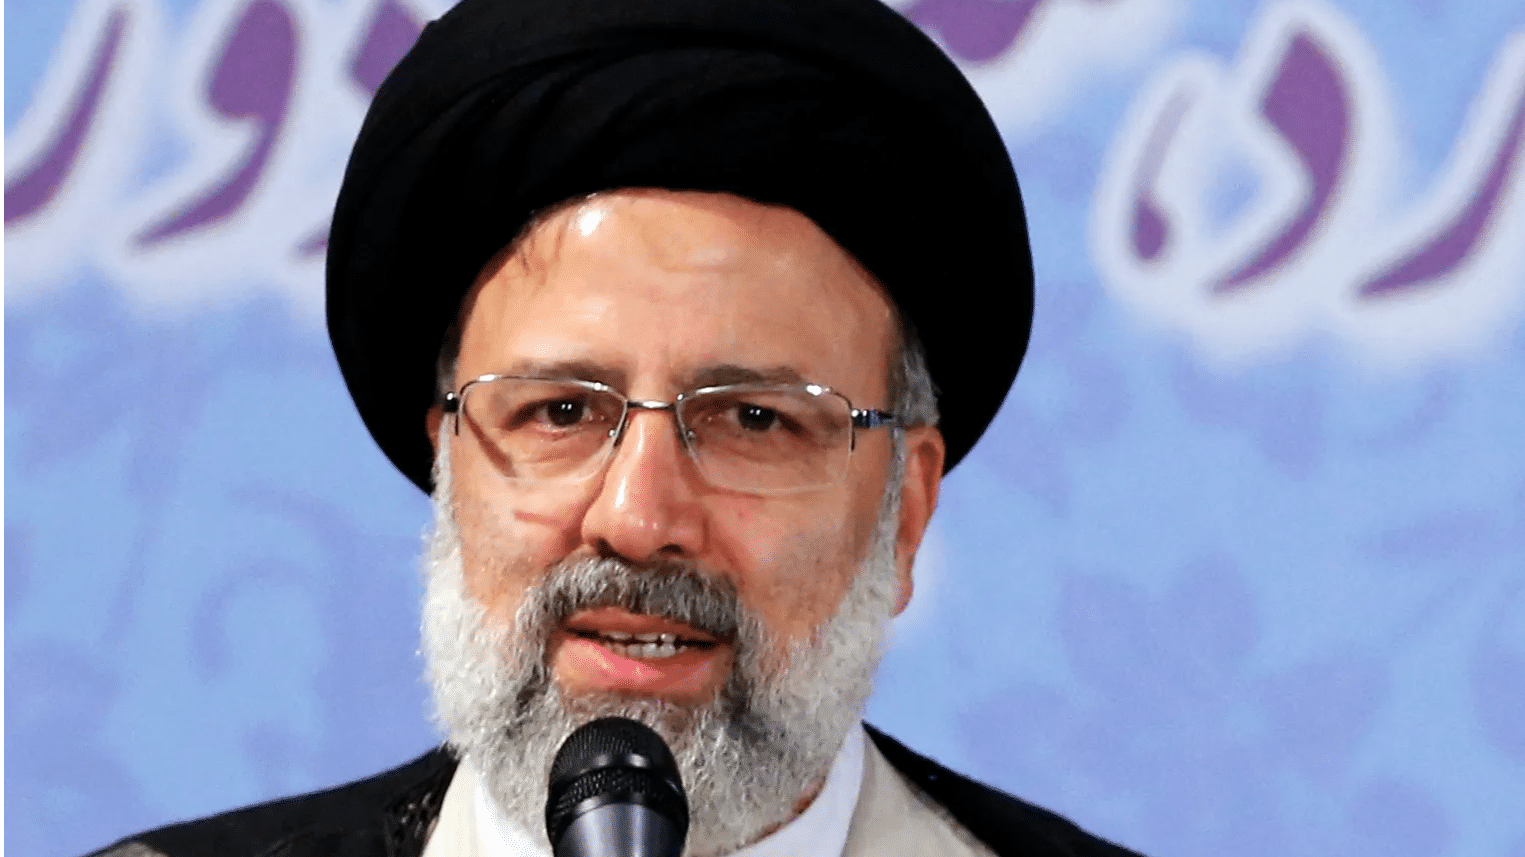 Iran Prez concedes poll defeat without naming expected winner Ebrahim Raisi